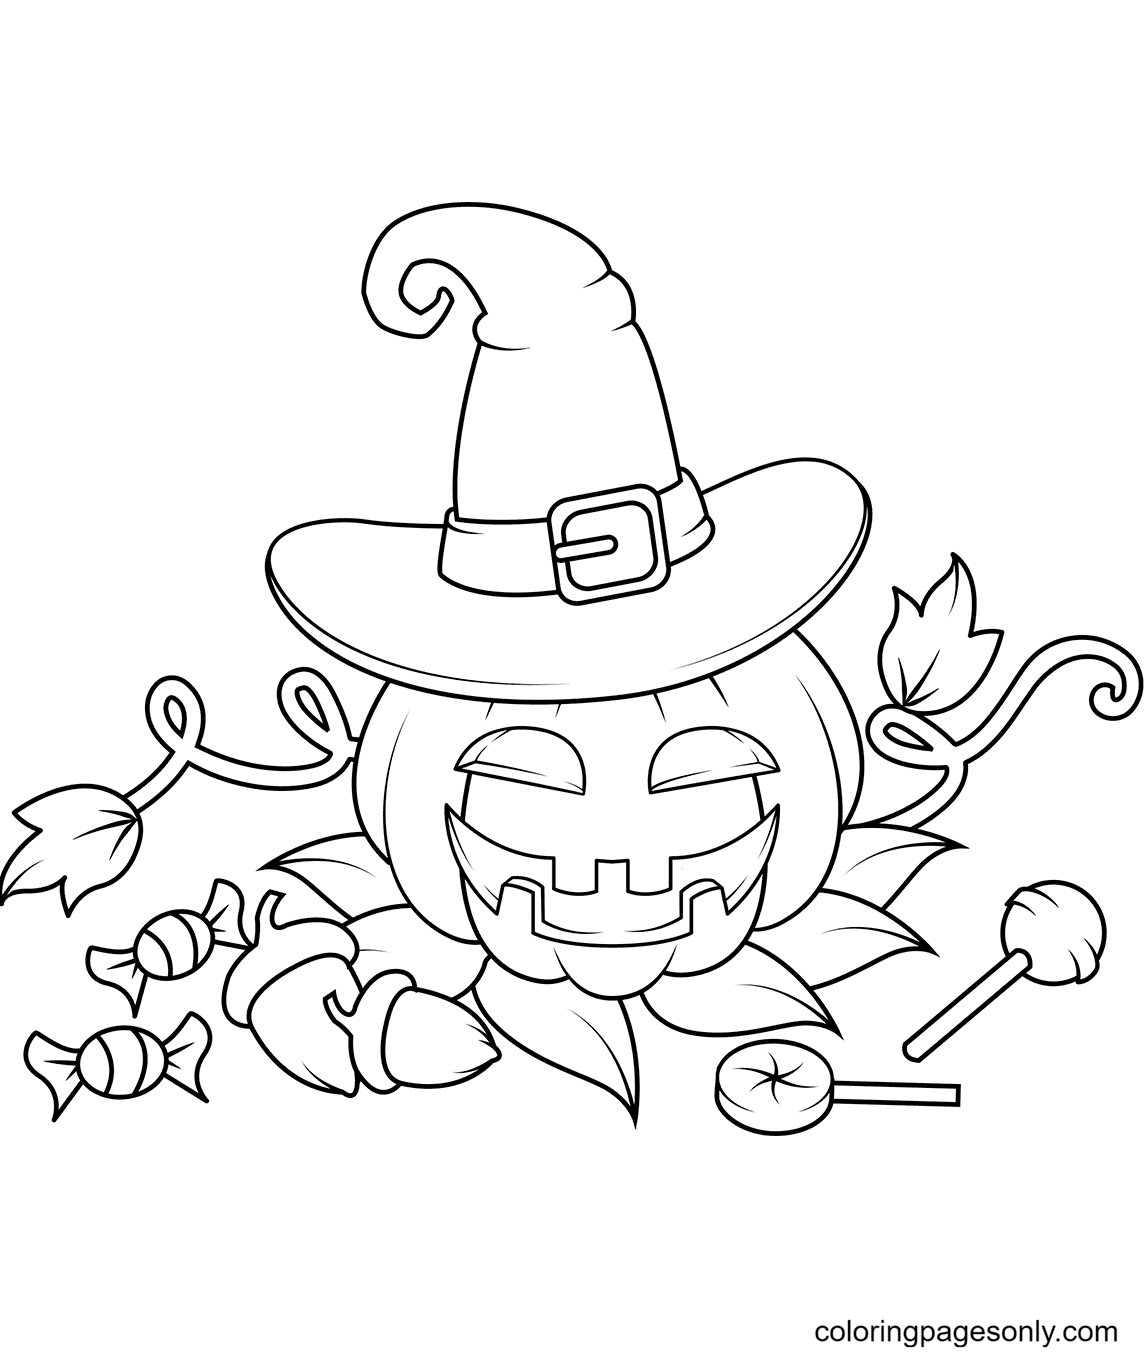 Jack O’Lantern in a Witch Hat with Candies Coloring Page